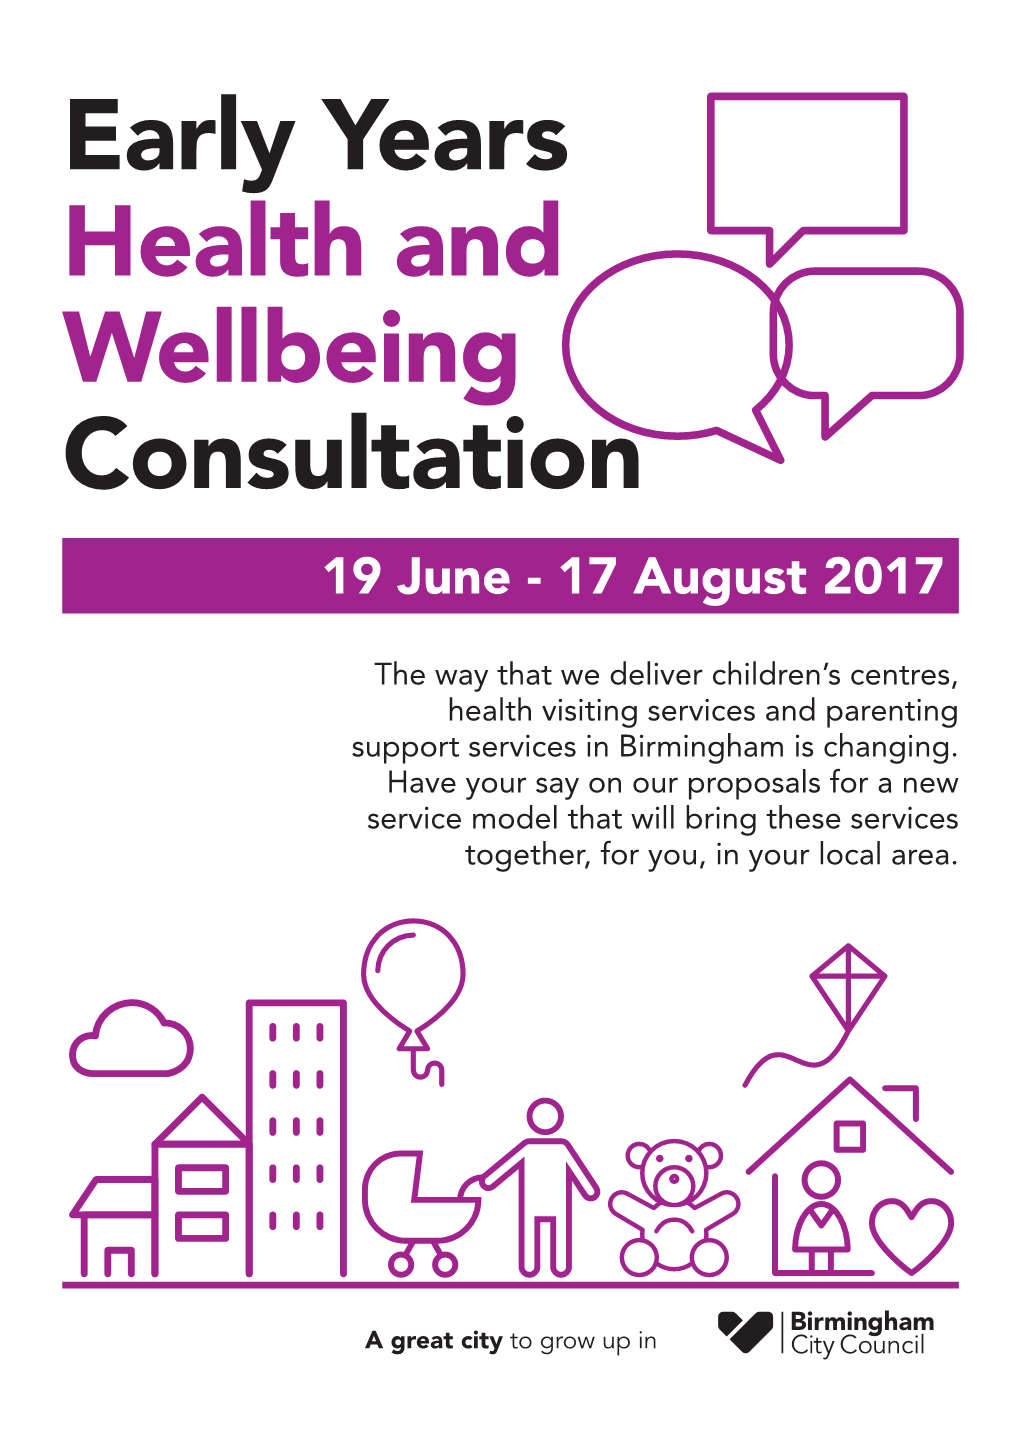 Early Years Health and Wellbeing Consultation Booklet